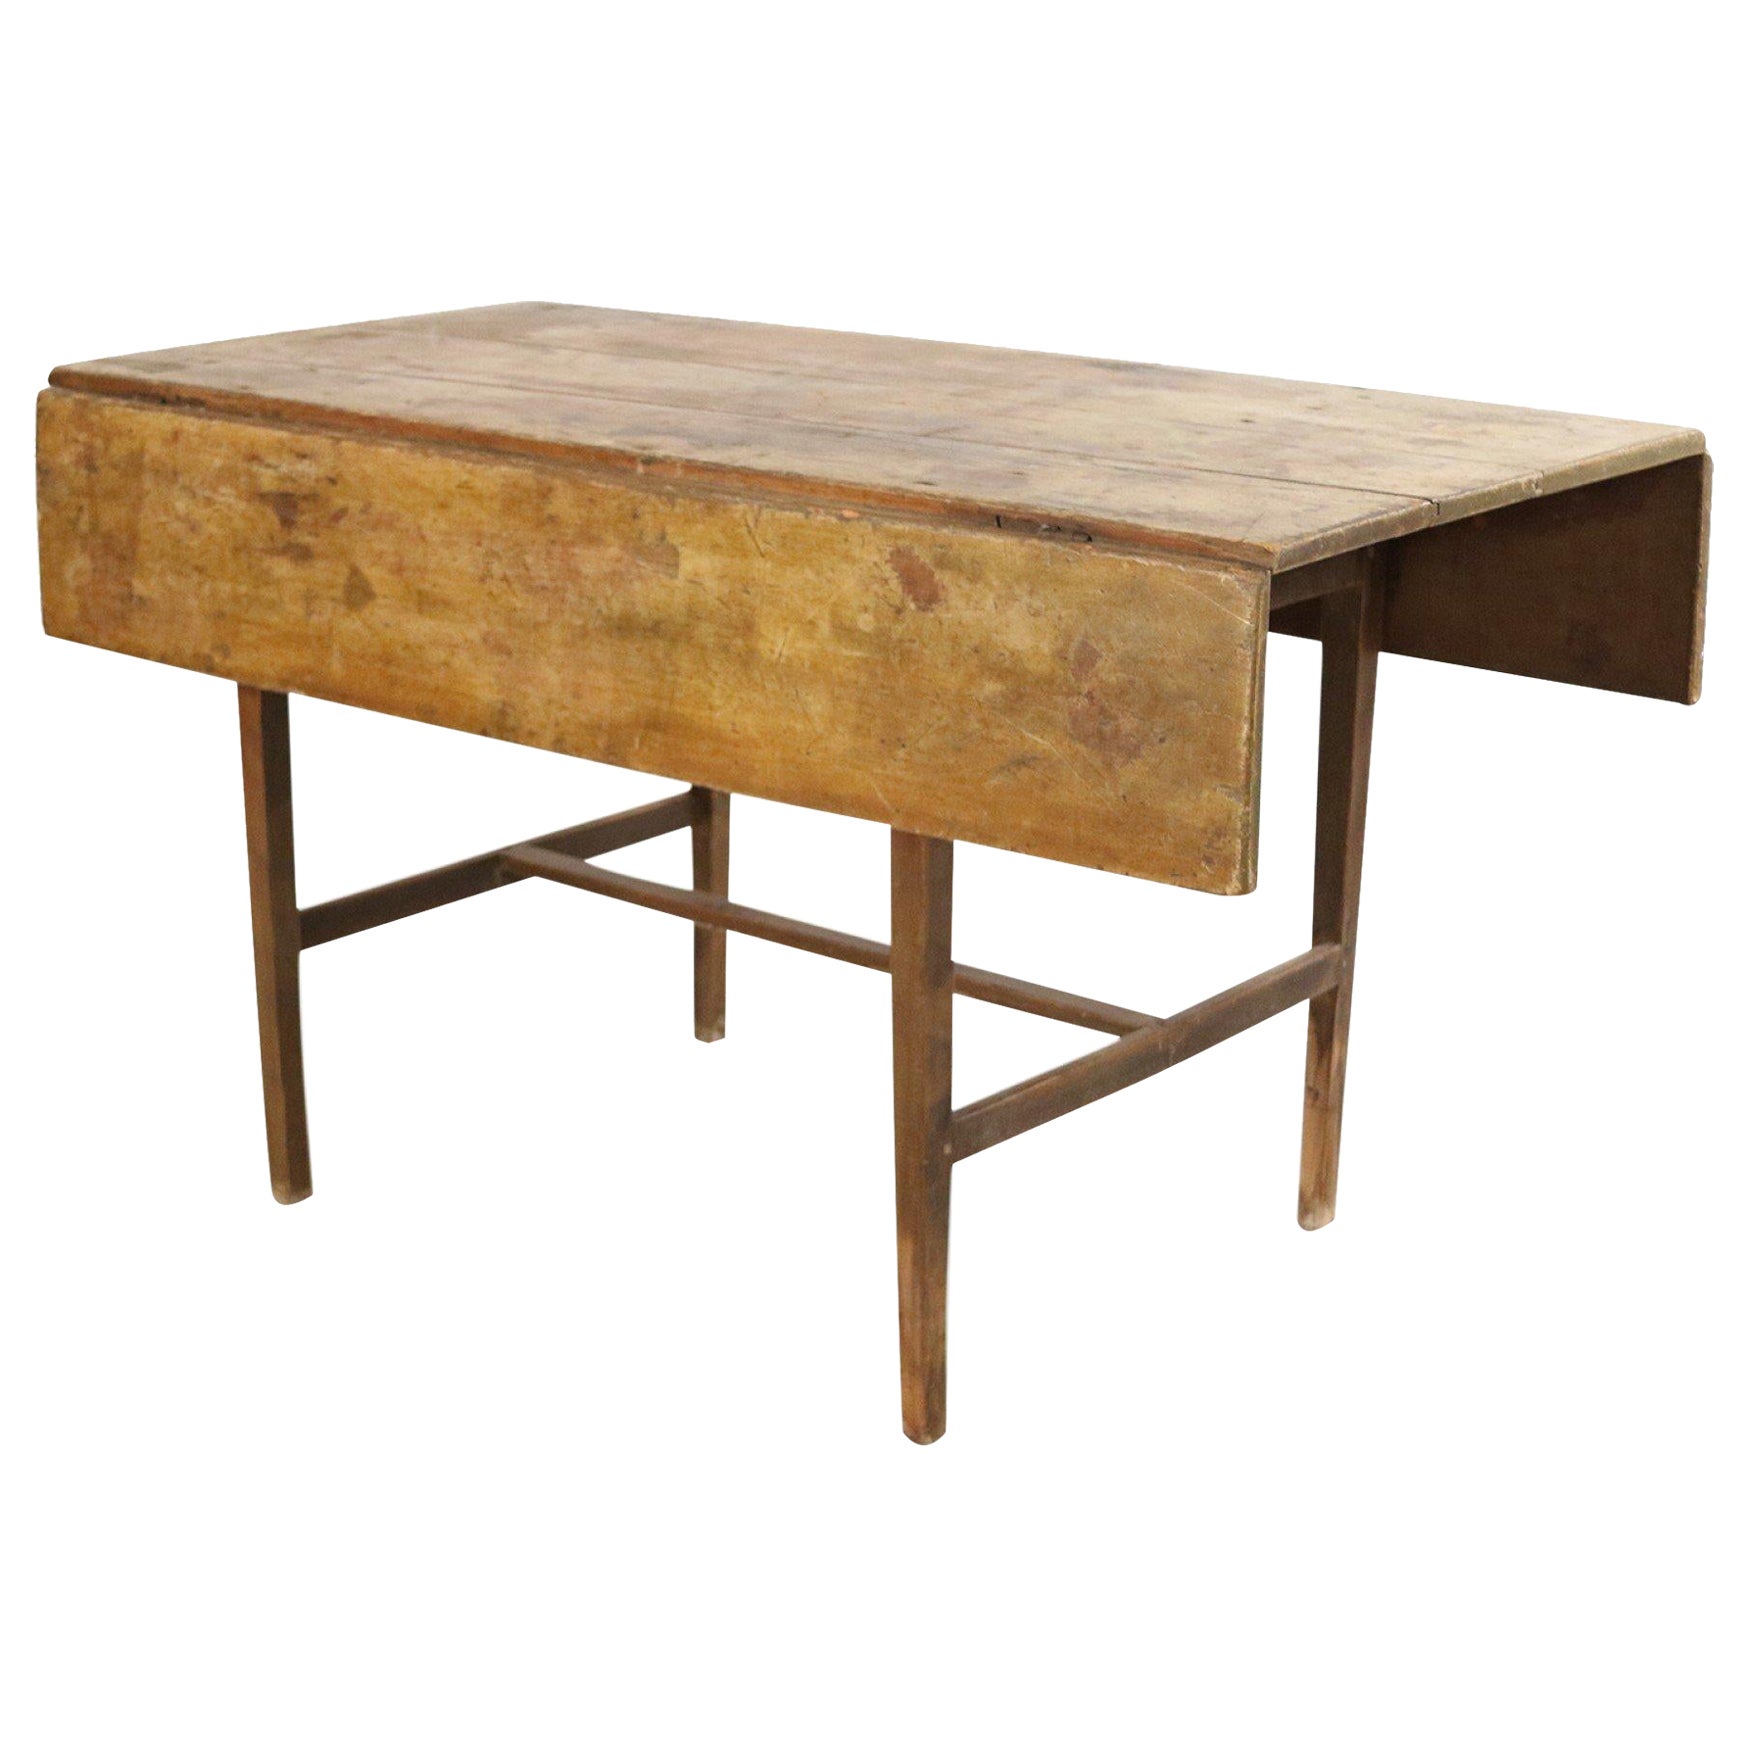 American Country Rustic Pine Wood Drop Leaf Dining Table For Sale